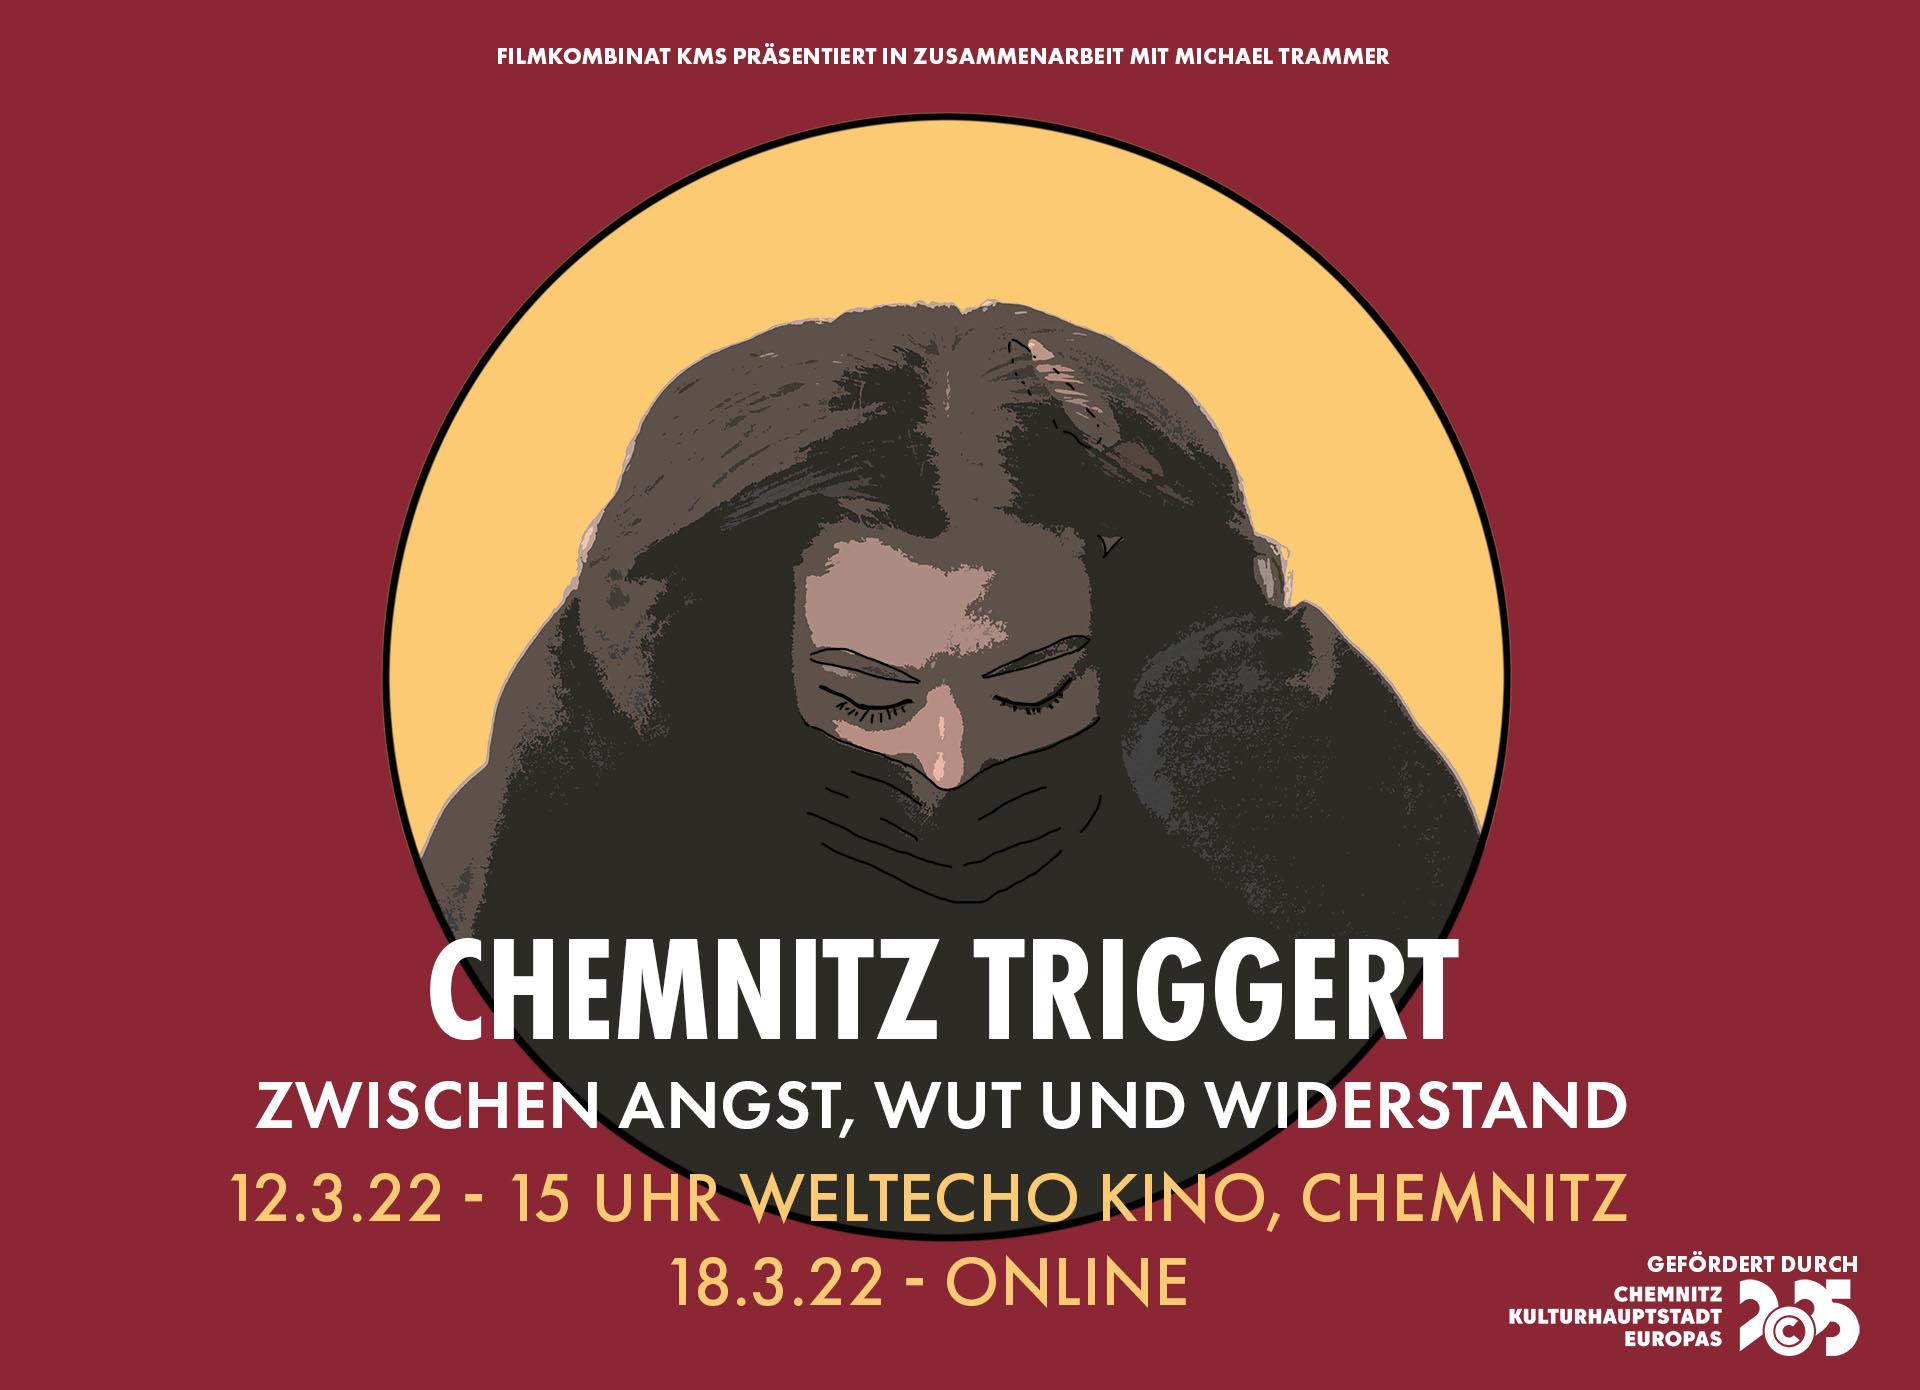 Release "Chemnitz Triggers - Between Anger, Fear and Resistance"